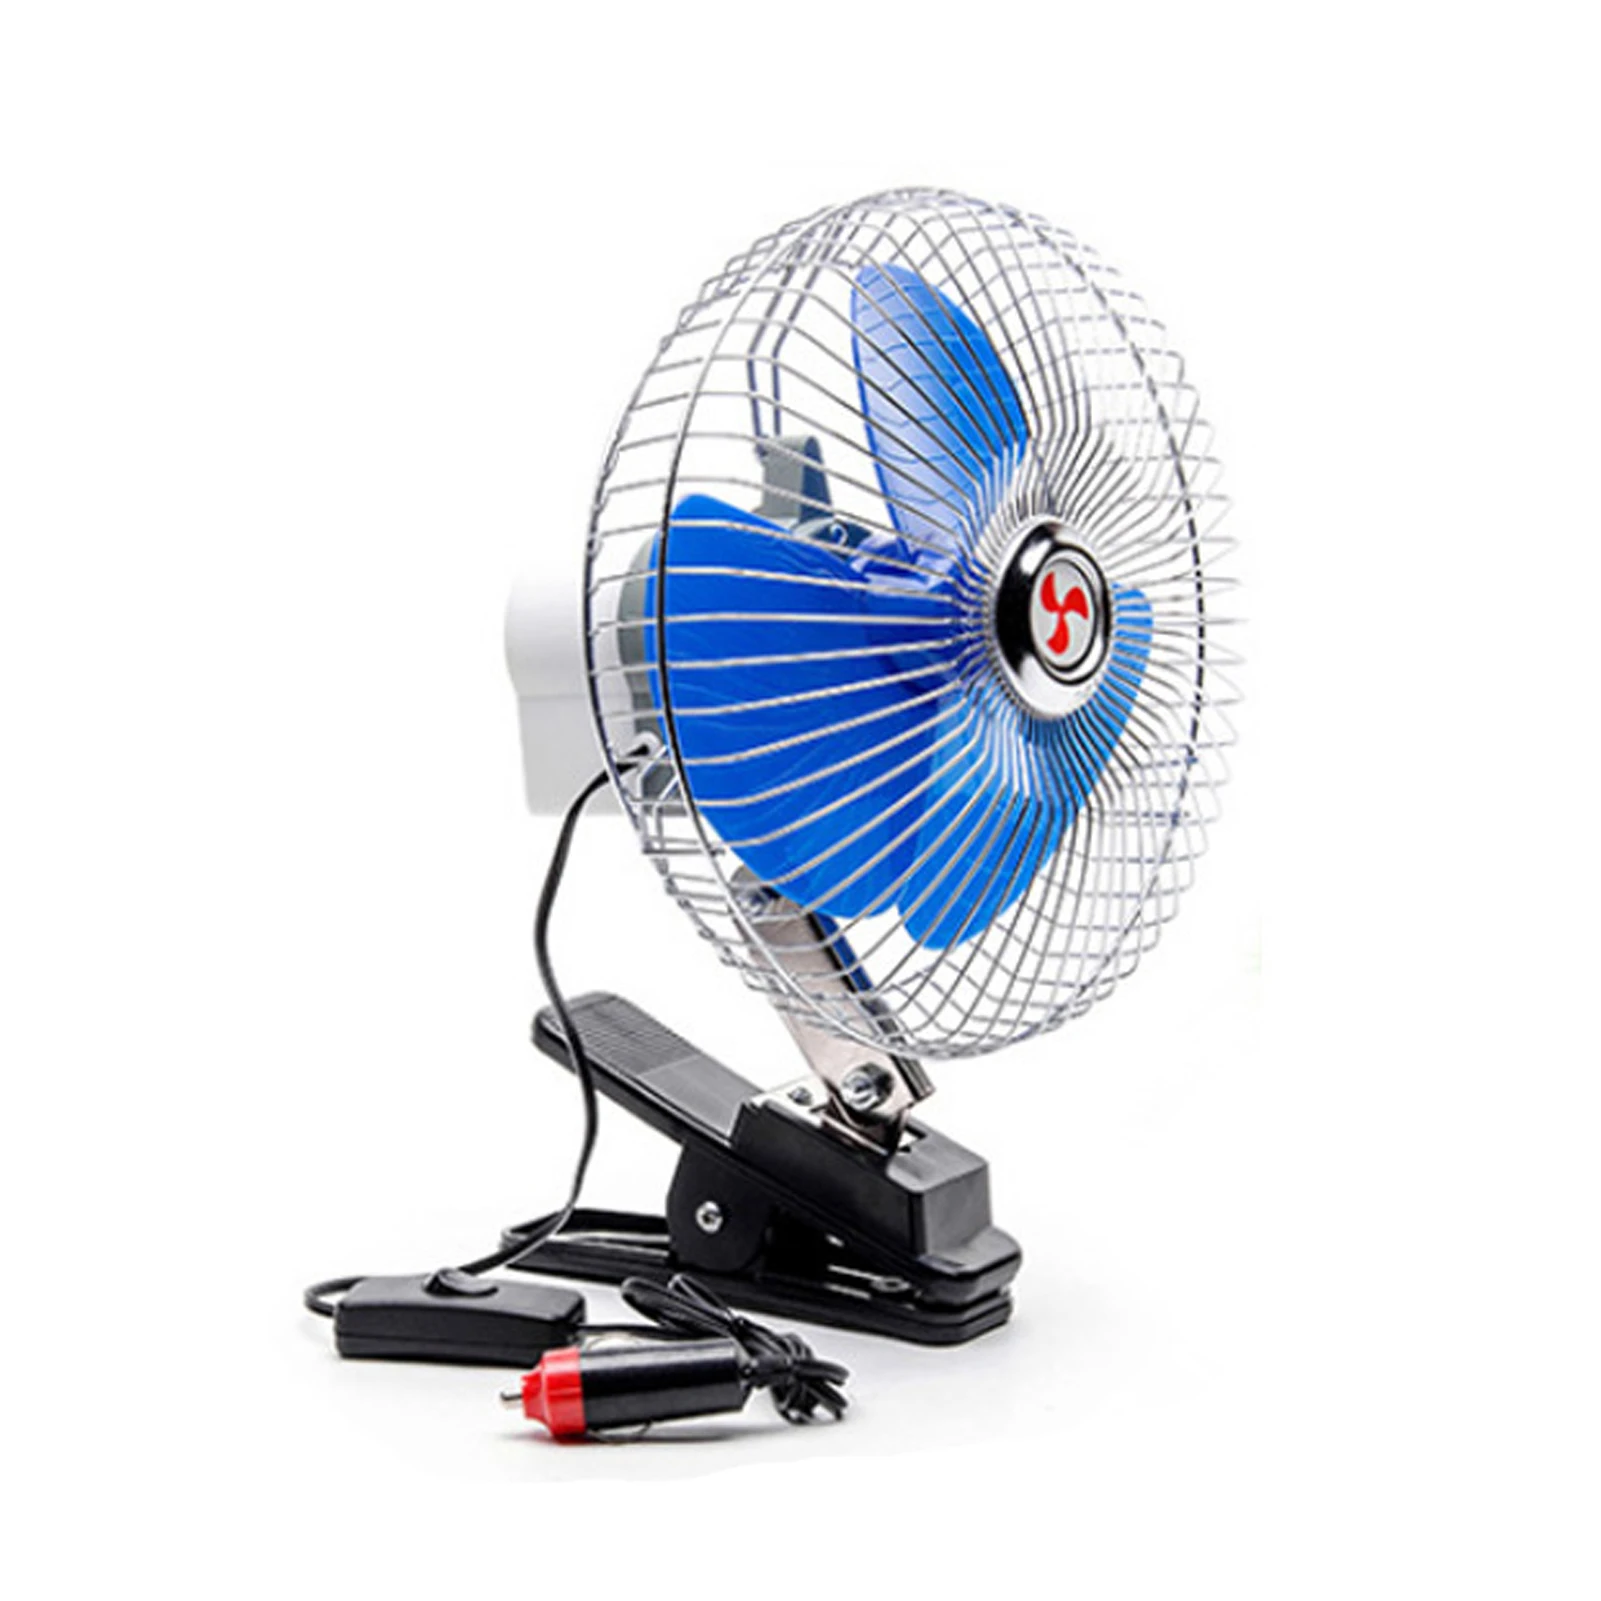 

12V/24V Portable Car Fan 12V/24V Electric Car Fan With Adjustable Clip 180 Degree Rotatable Head Low Noise Vehicle Fan With